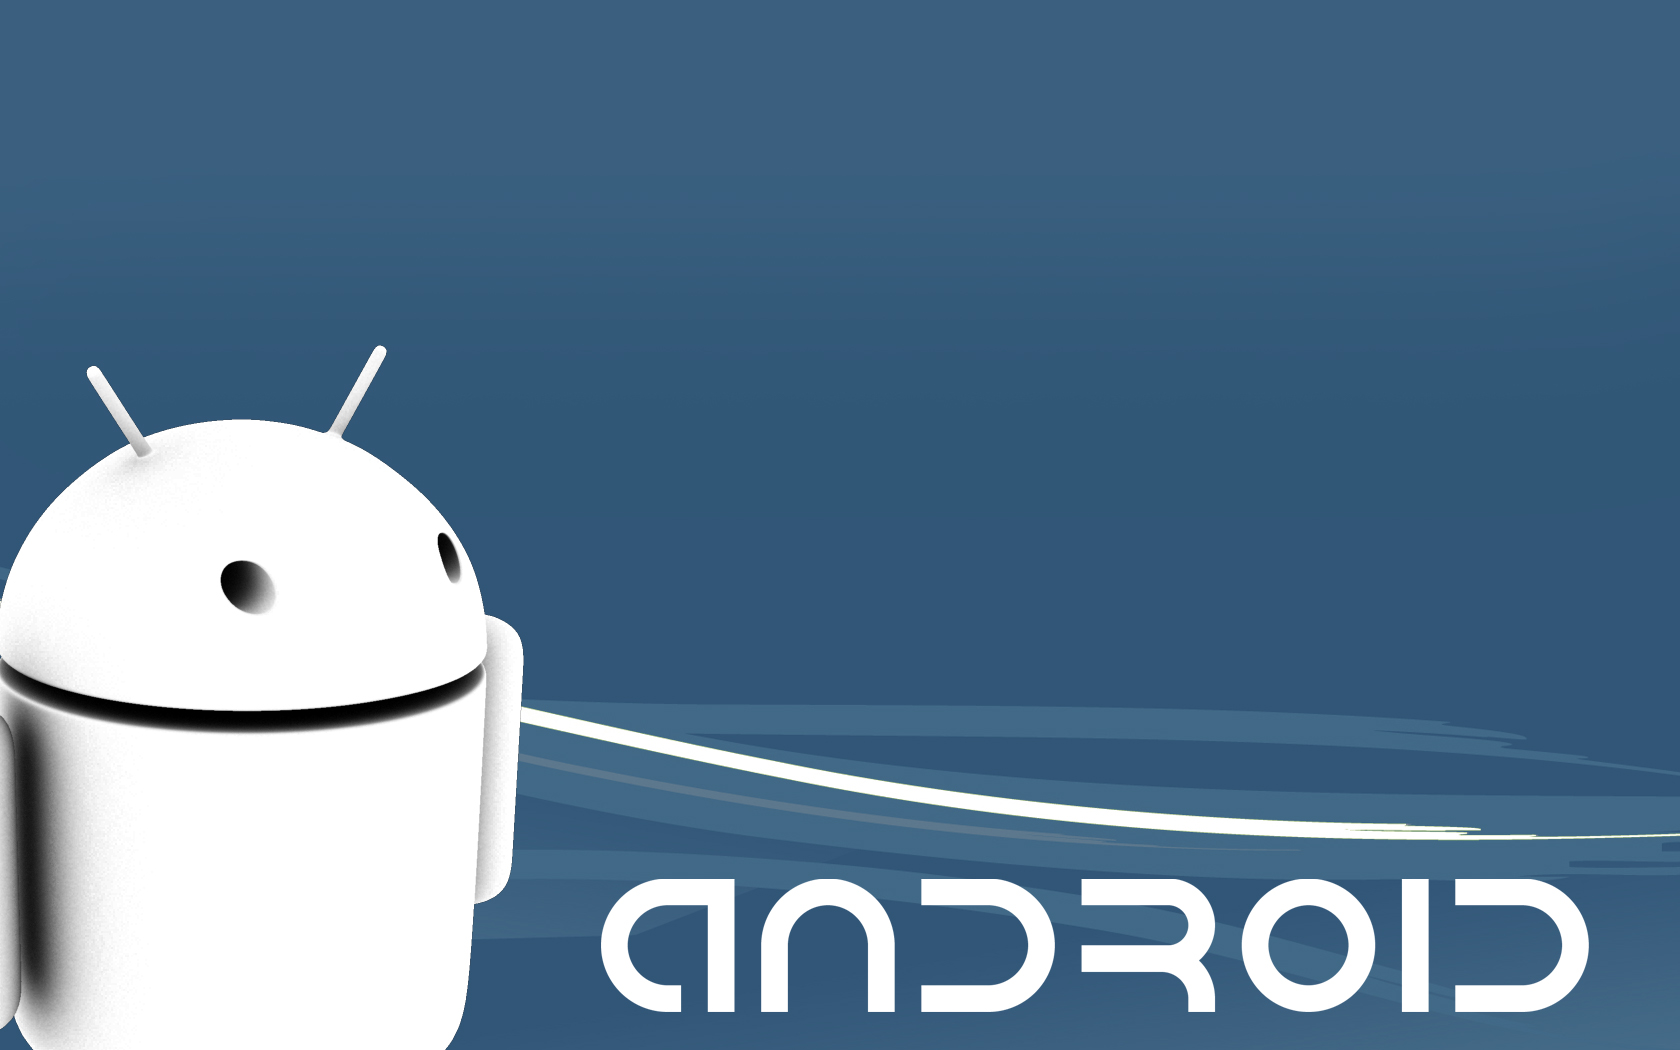 3d Android Wallpaper Blue By Happybluefrog